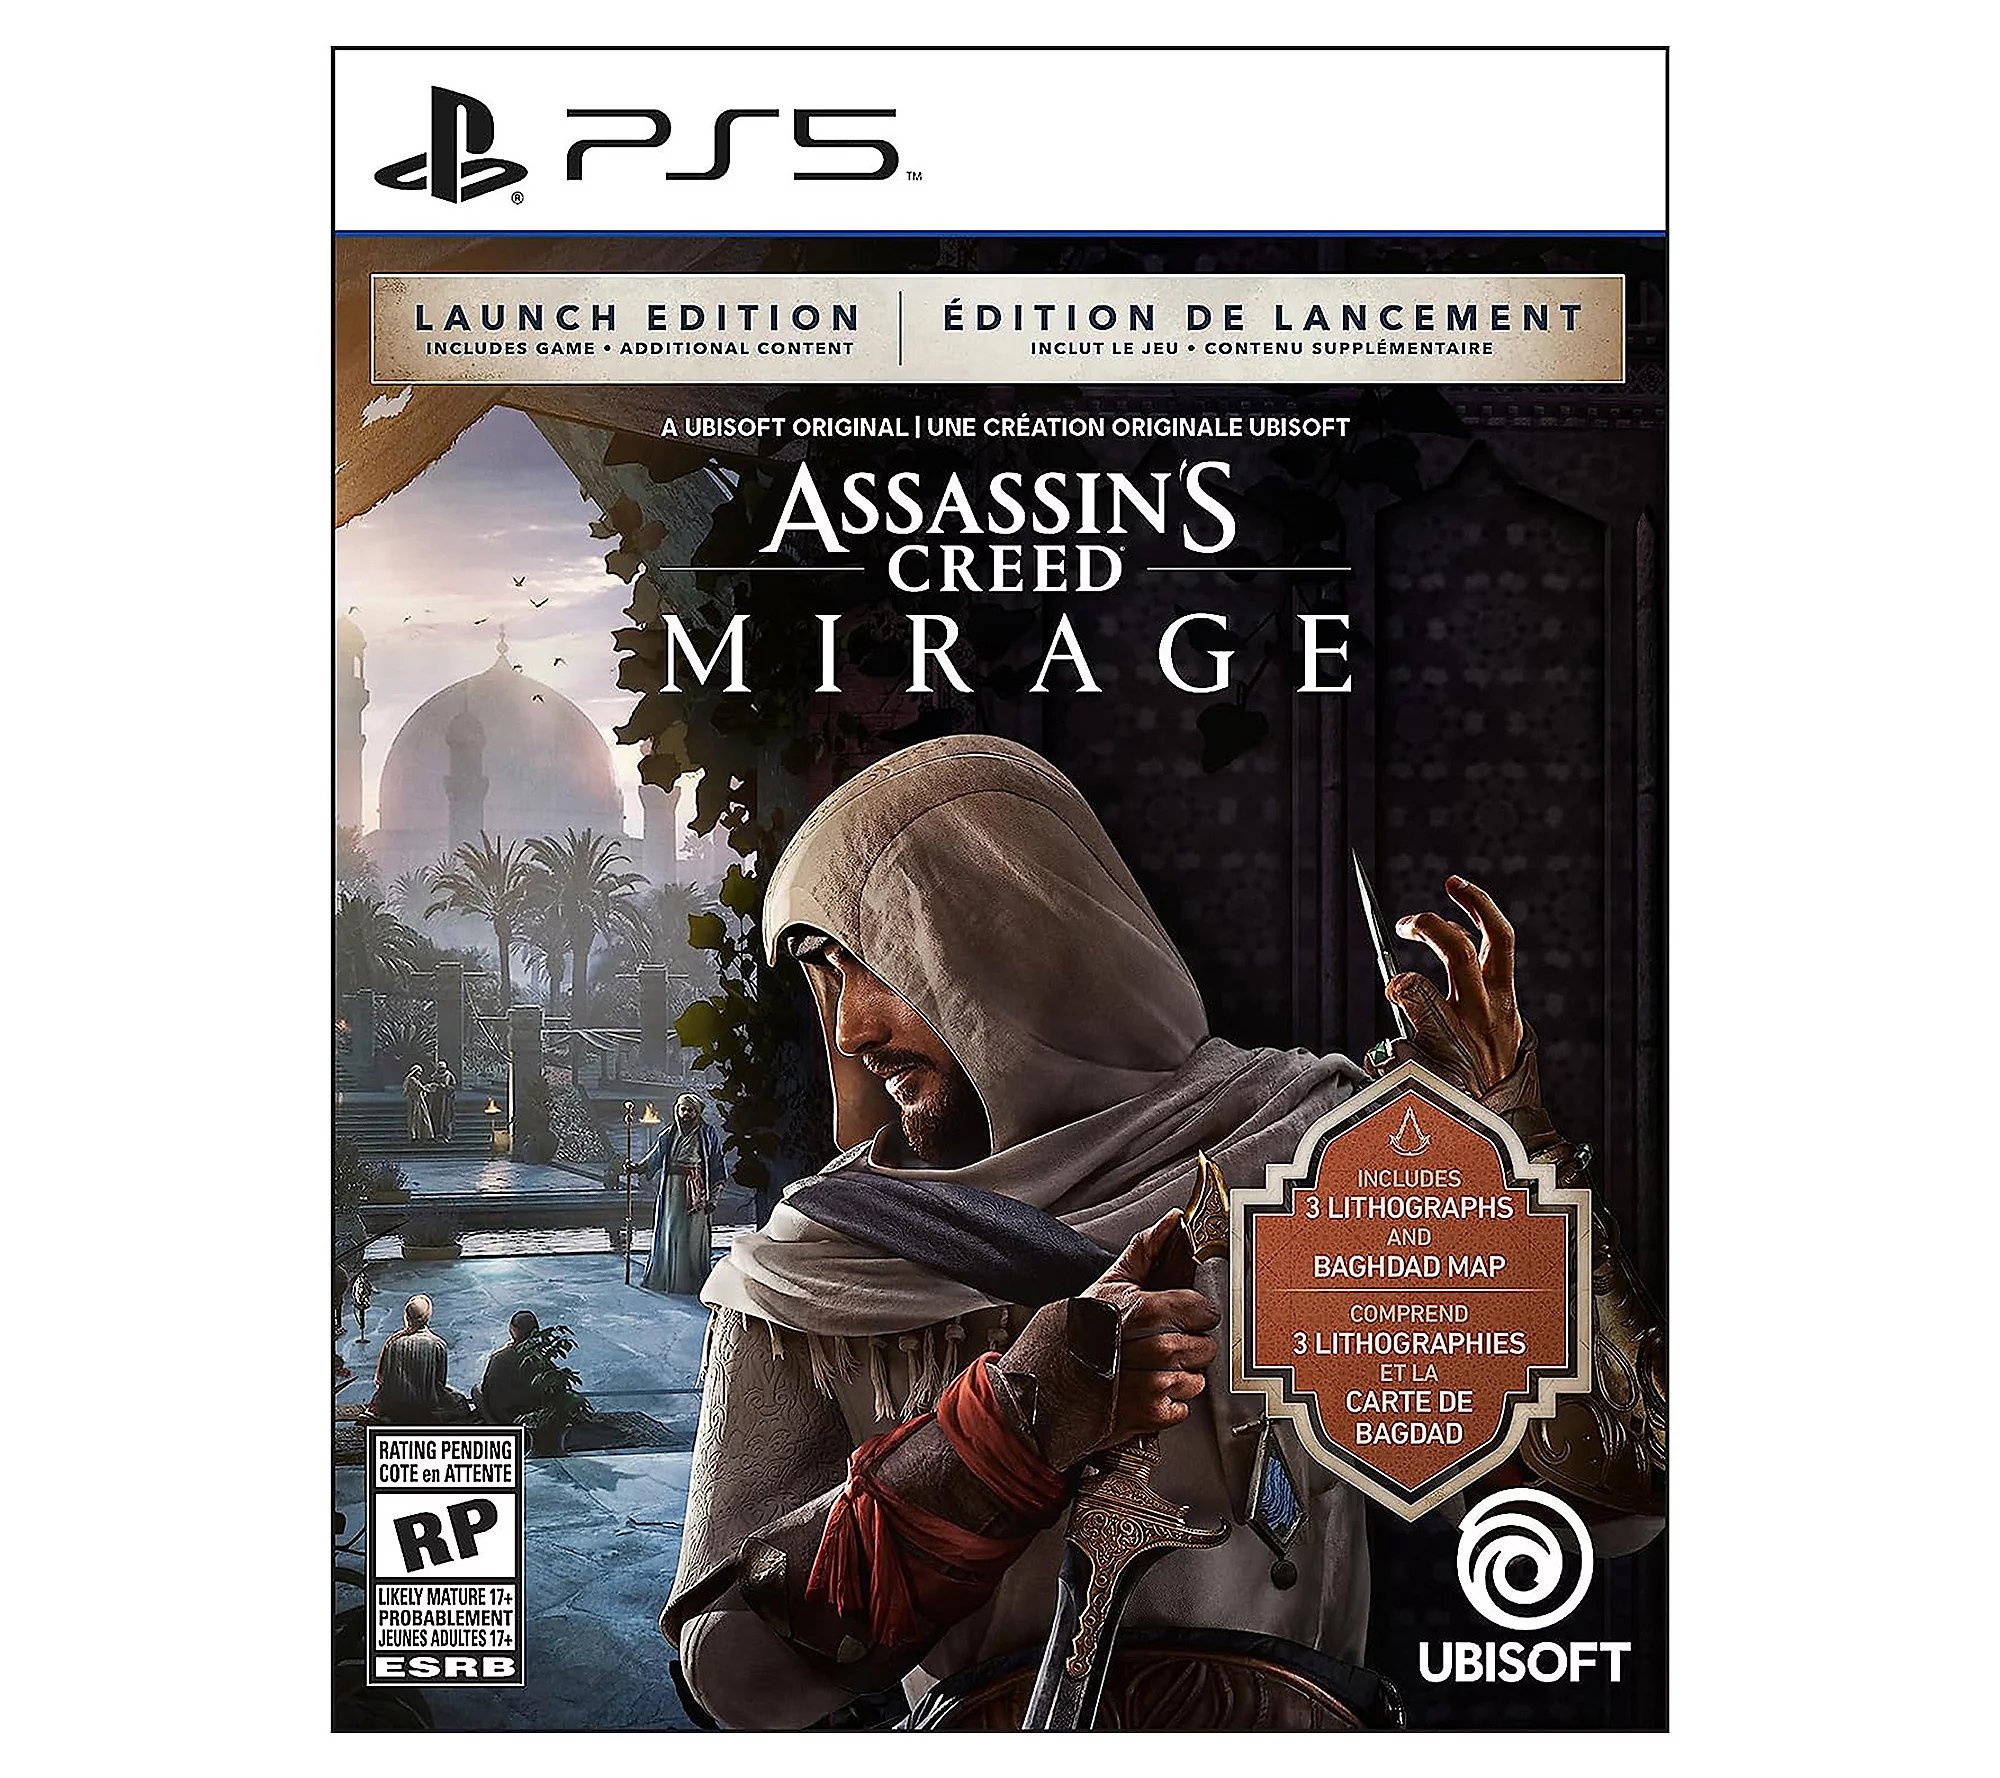 Wario64 on X: Assassin's Creed Mirage (PS5/PS4) is $34.99 at QVC w/ code  HOLIDAY  PS5  PS4   #ad discount code for new accounts. if it shows  sold out, try again